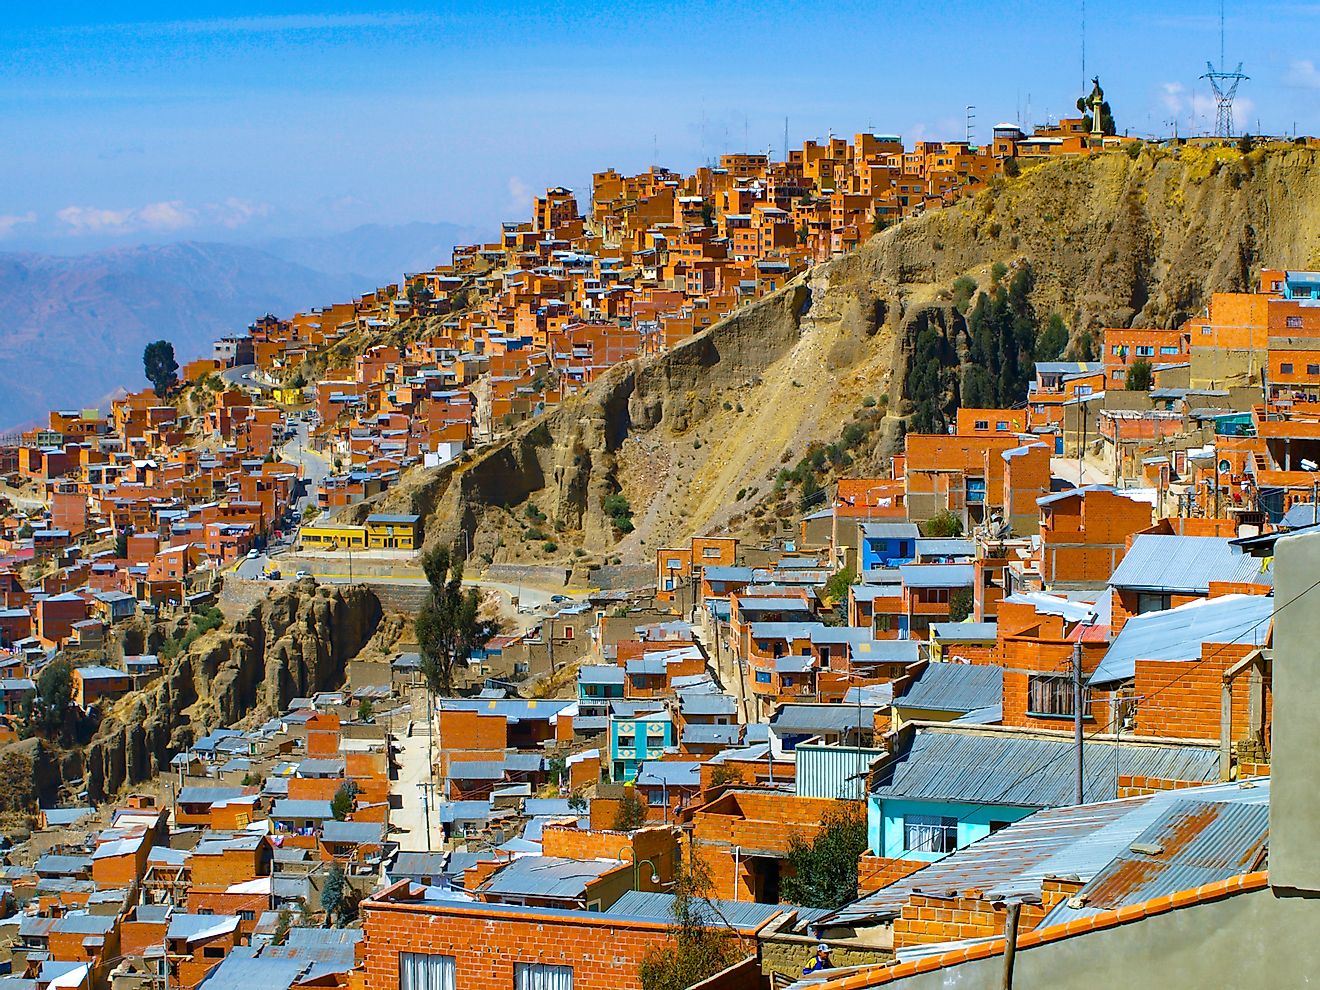 La Paz, Bolivia is an entry on the list of New7Wonders Cities. 